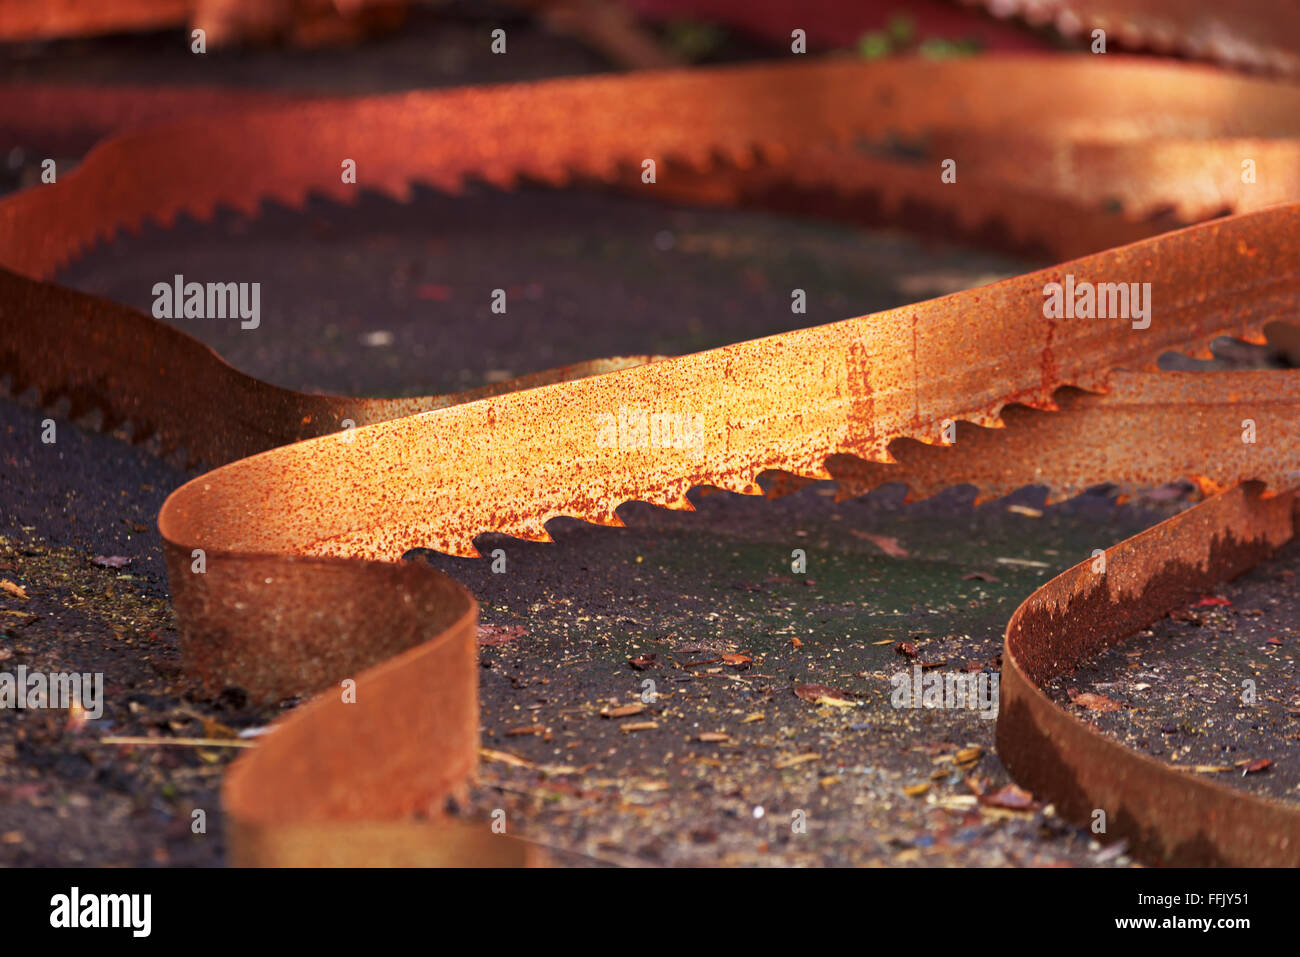 A rusty old saw blade from an industrial band saw. This high speed blade was used for cutting wood. Stock Photo